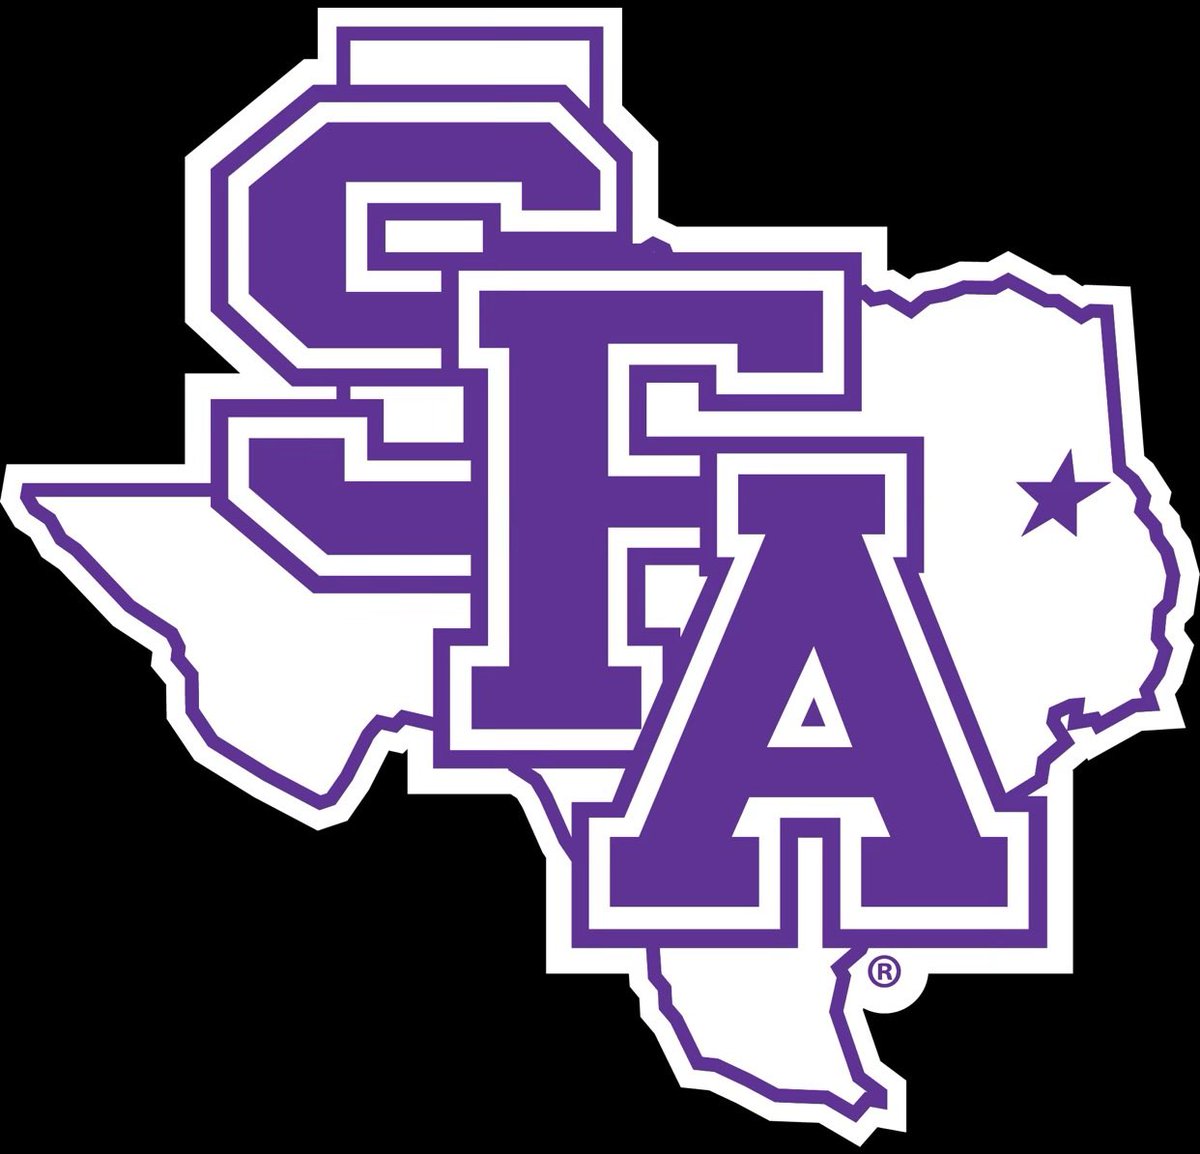 God is Great!
Very humble and blessed to have received a D1 offer from Stephen F. Austin University! Big thank you to @CoachTrice8 for this opportunity! 🟣 @Ogthetruth @Coach_Sekona @coachTcsm @CoachBooth_CSM @hardee9596 @tlbutler5 @coach_schrider #ogisdbu